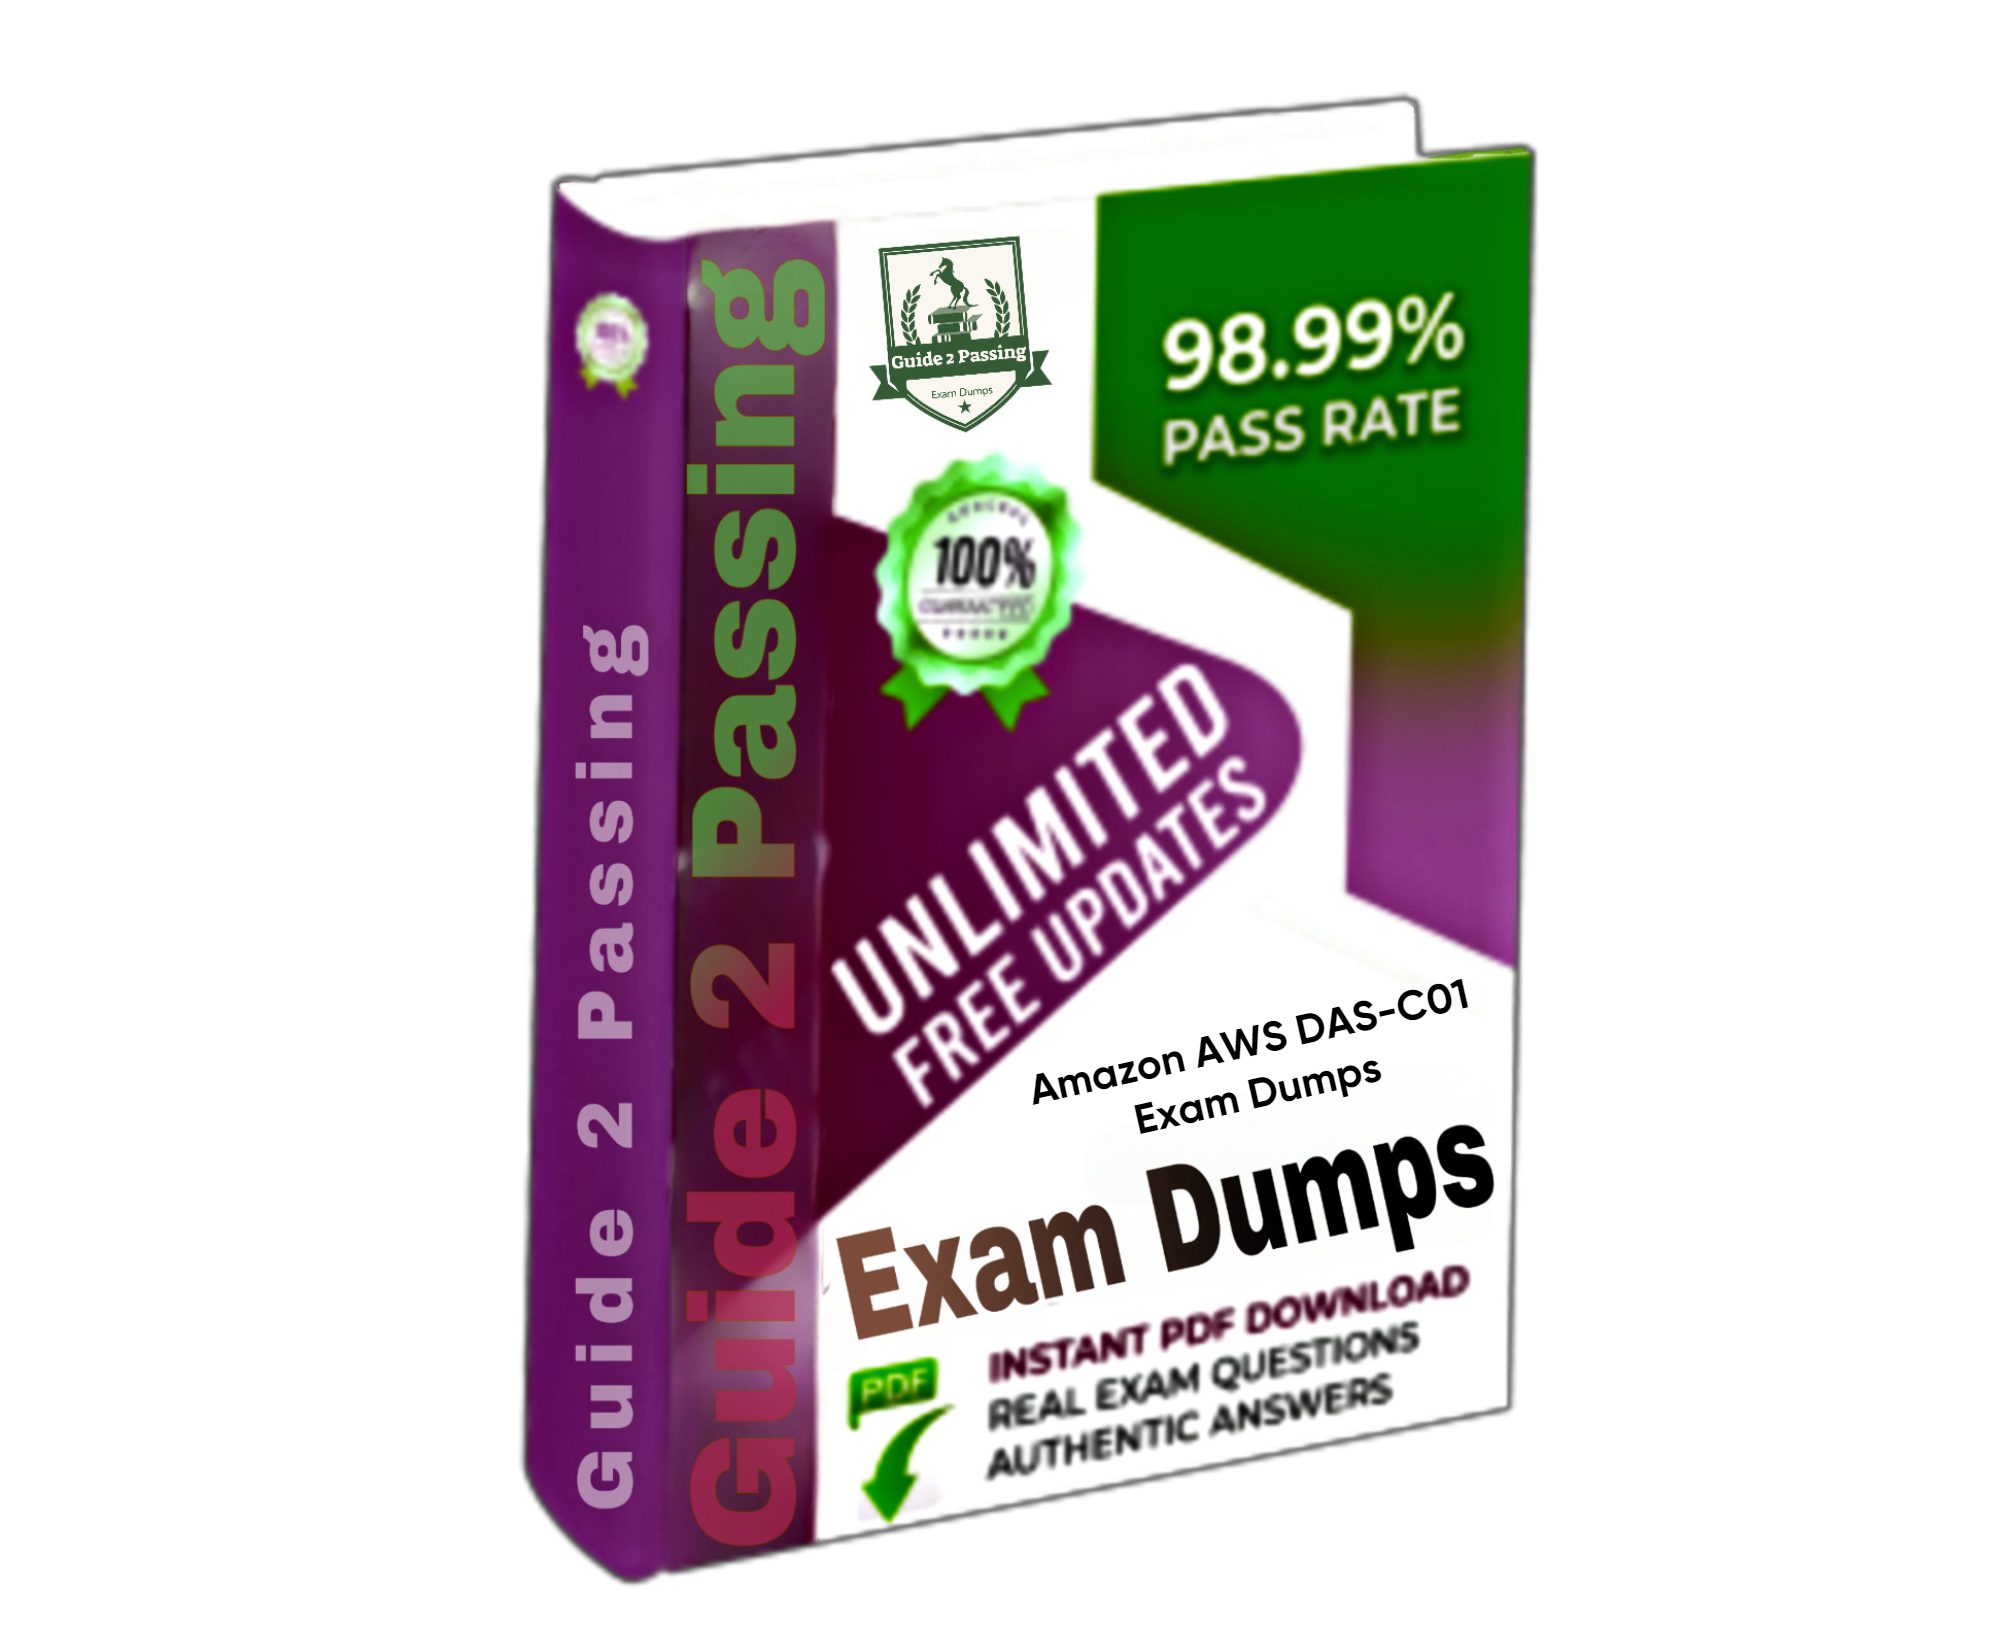 Pass Your Amazon AWS DAS-C01 Exam Dumps From Guide 2 Passing